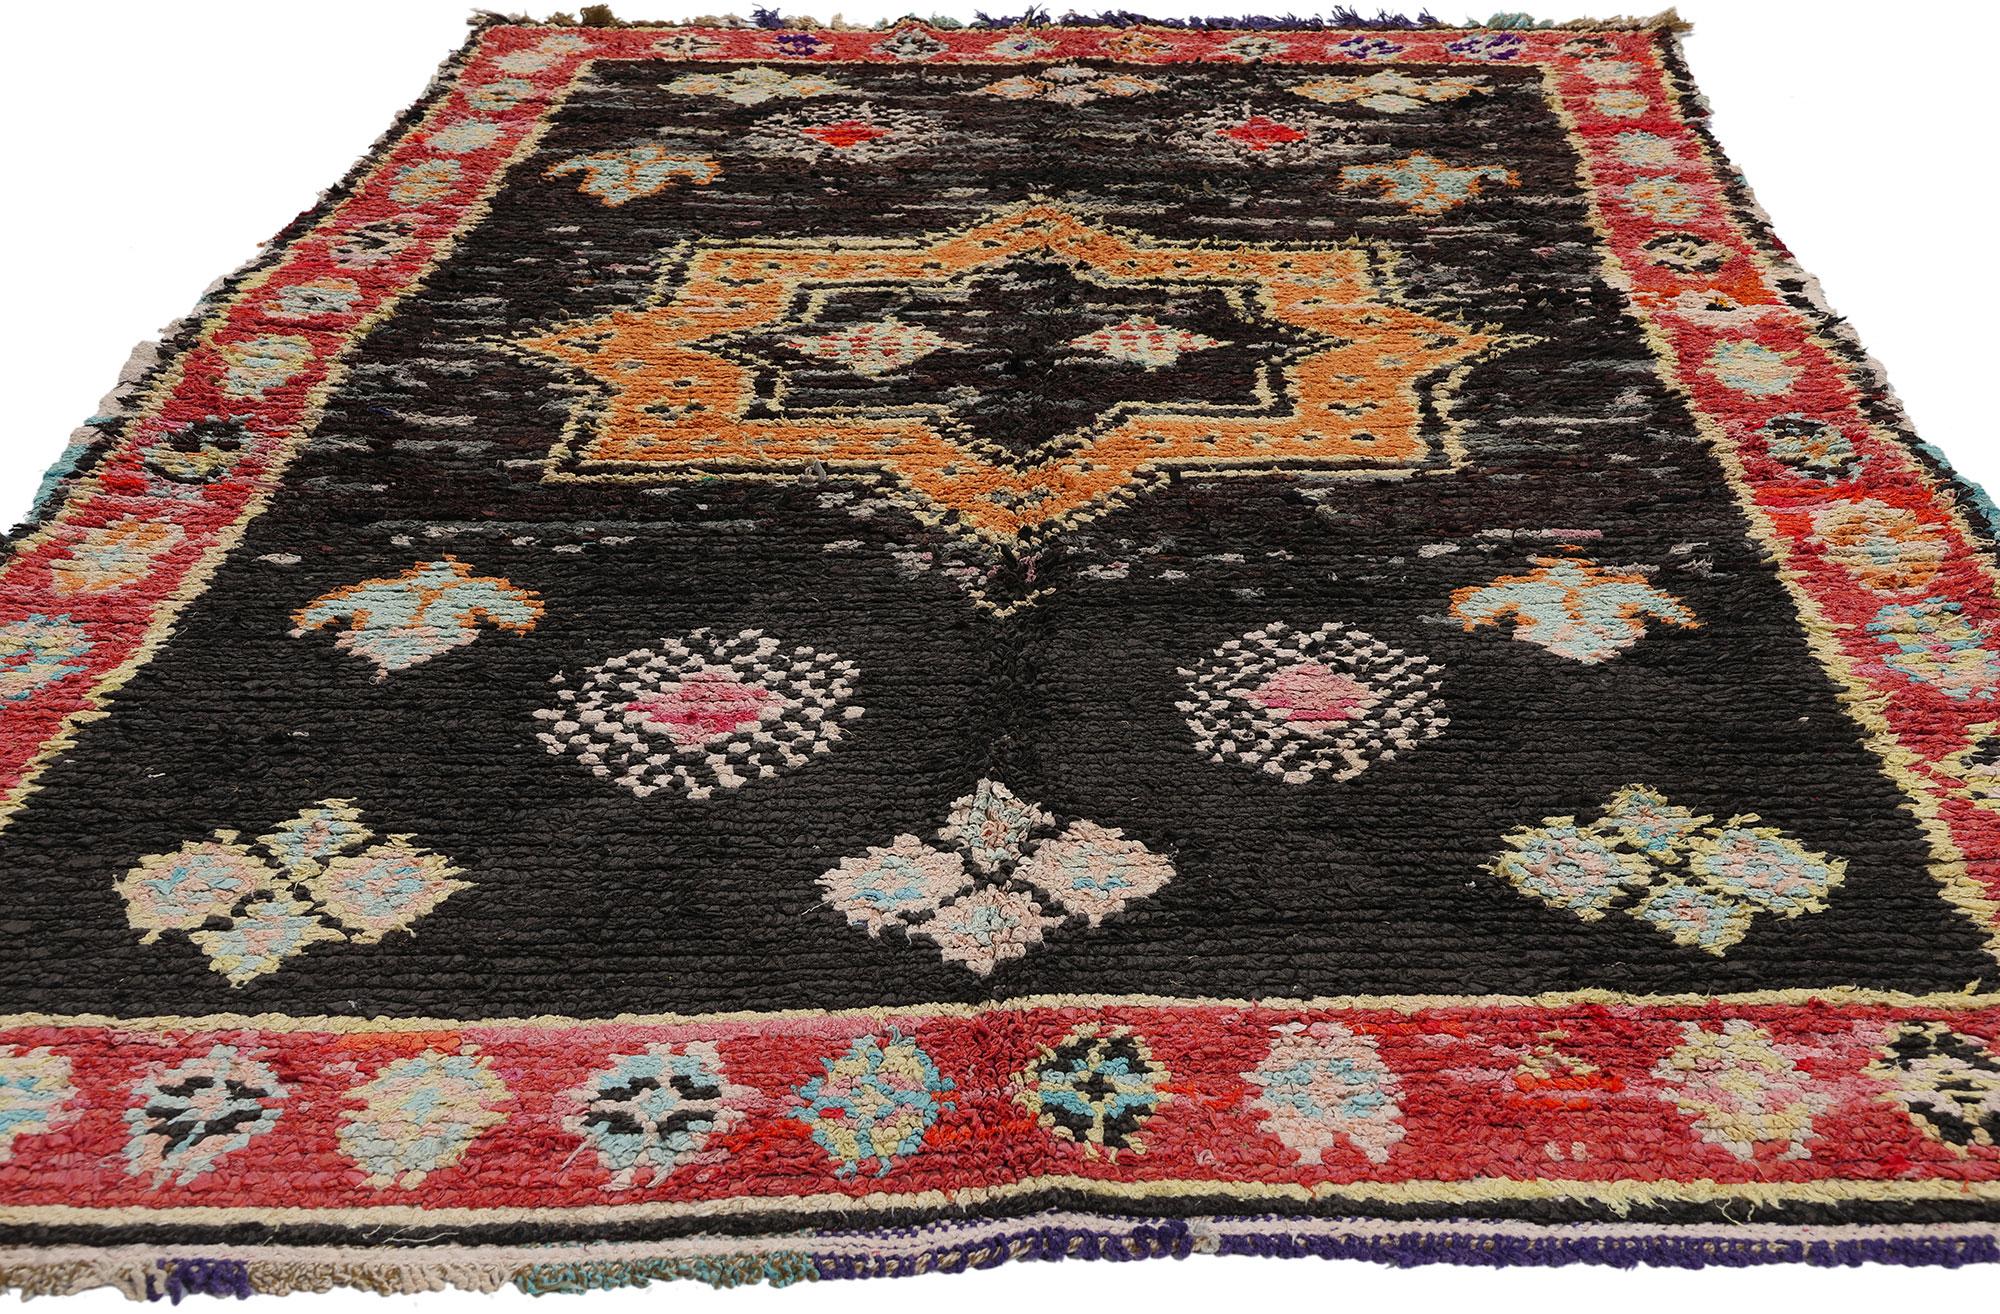 Tribal Vintage Boucherouite Moroccan Azilal Rag Rug, Sustainability Meets Cozy Nomad For Sale